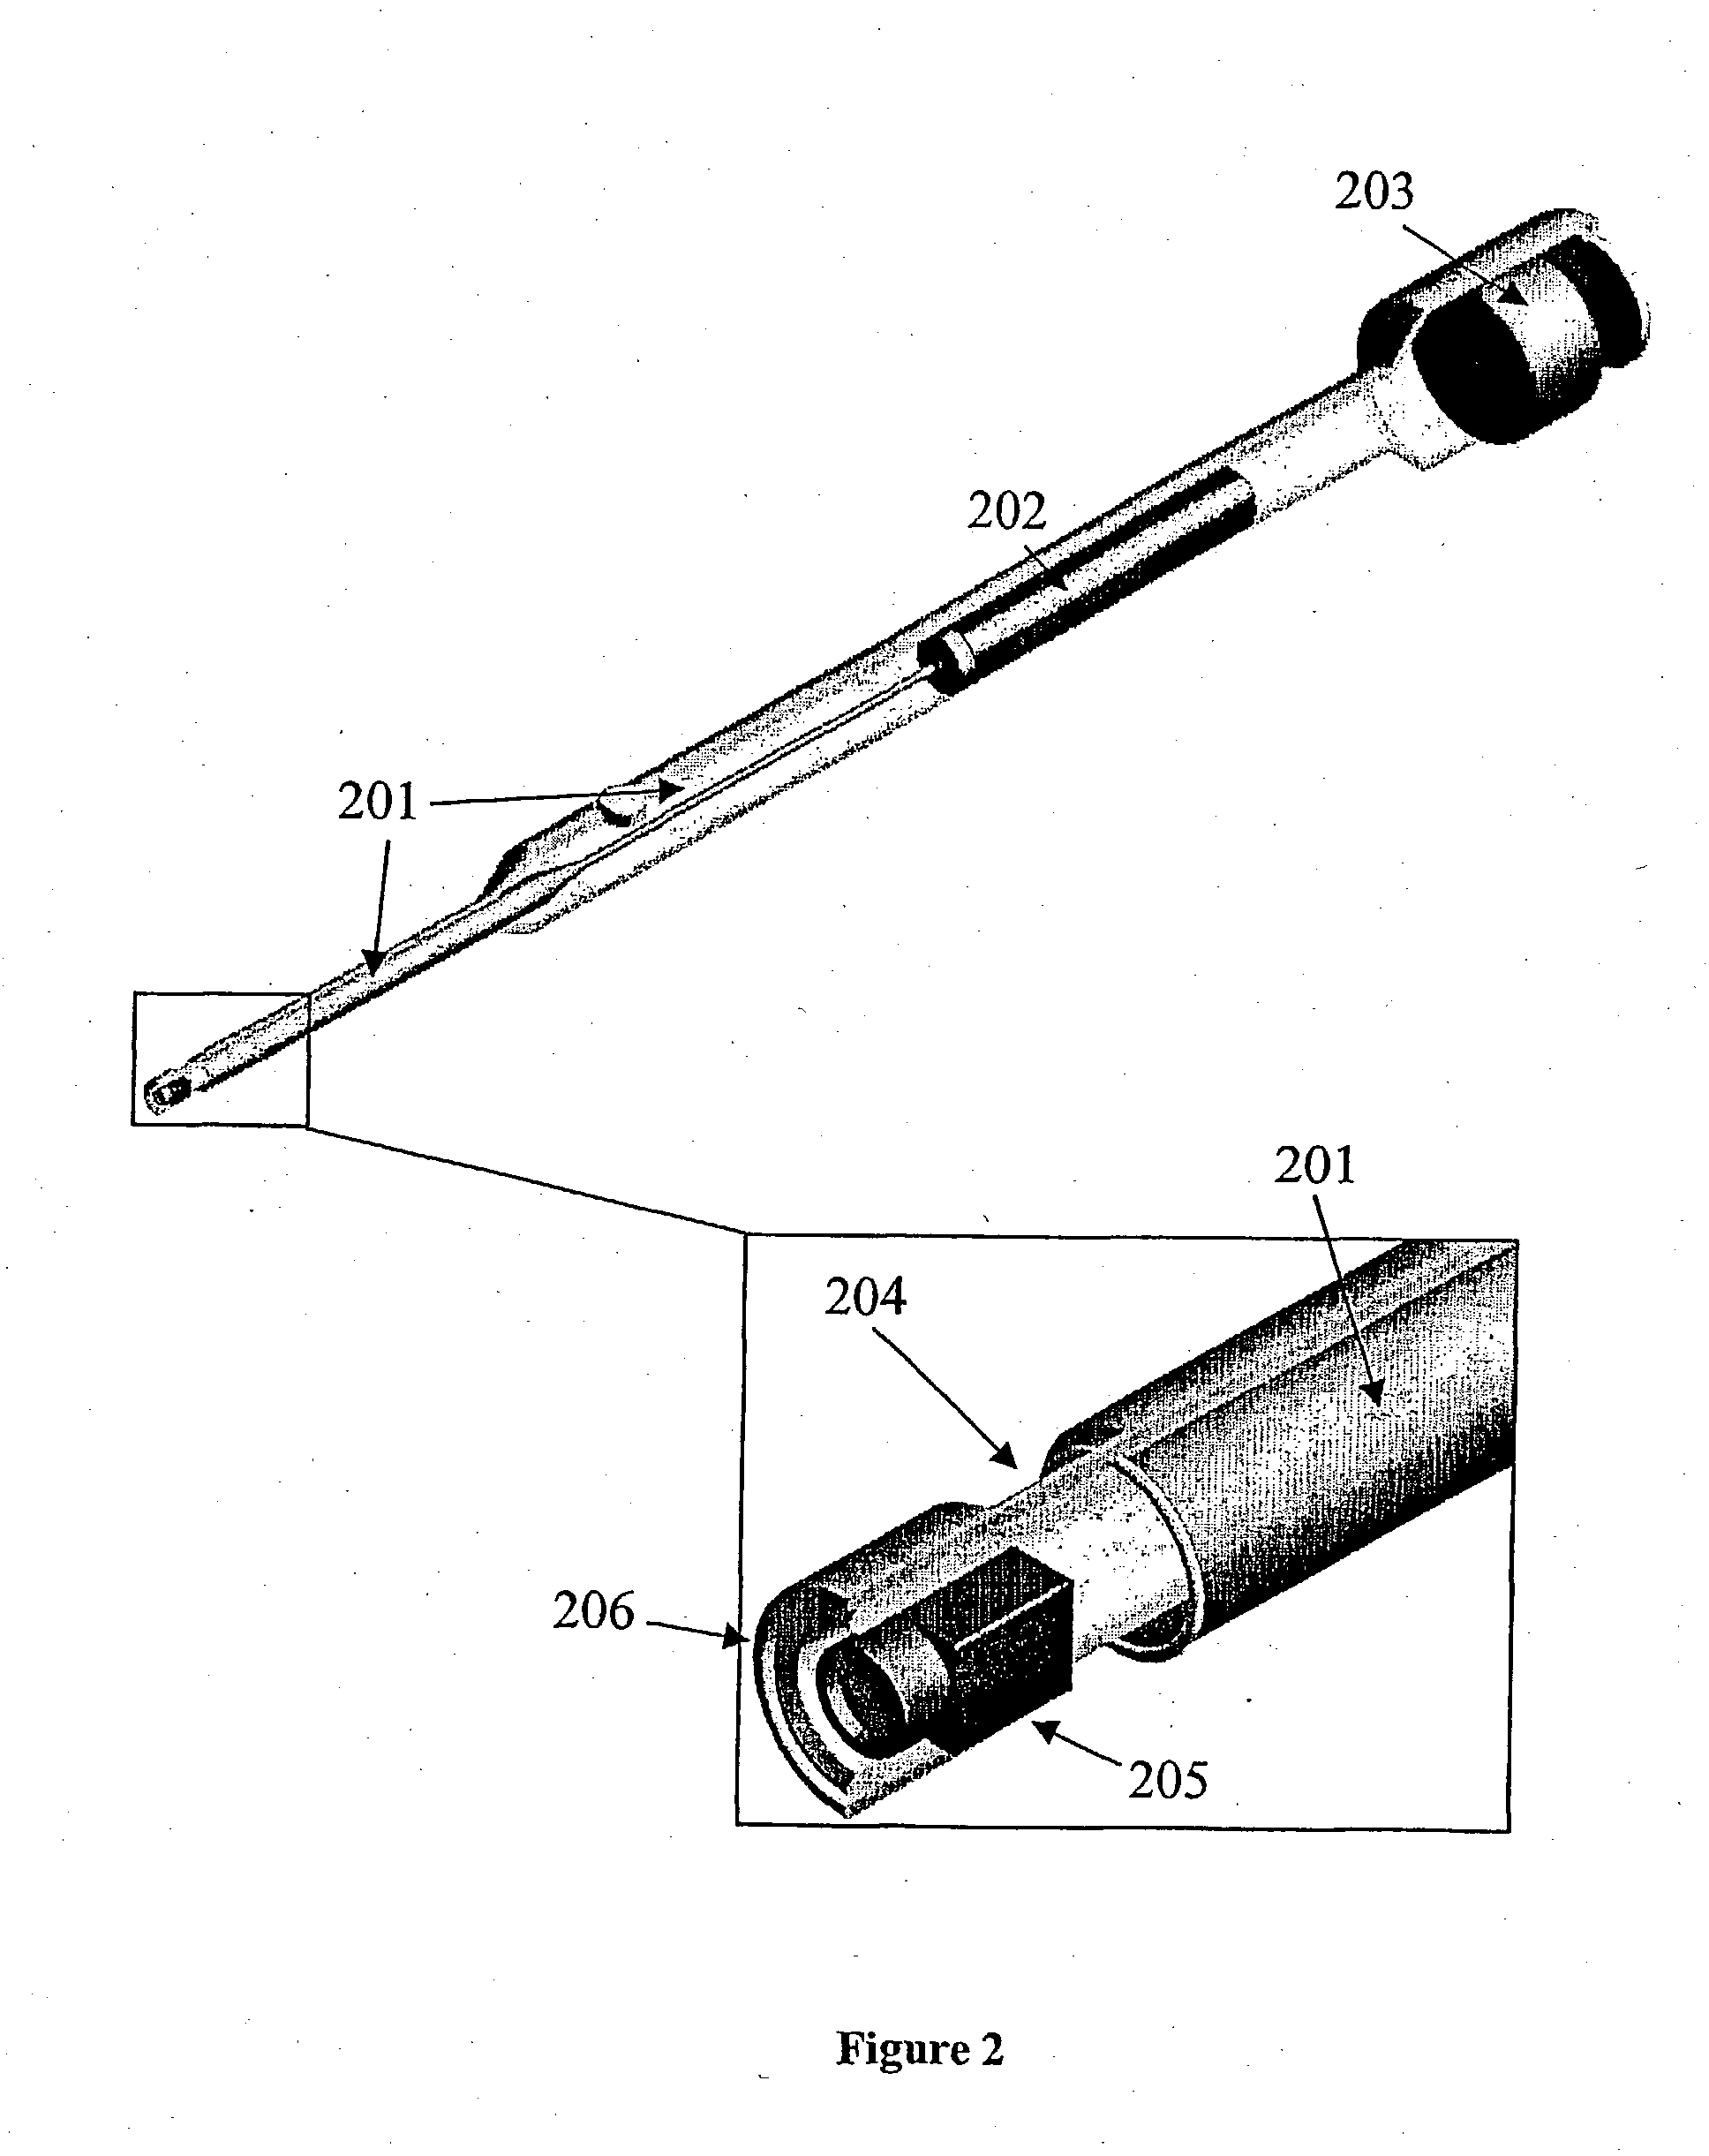 Method and apparatus for three-dimensional optical scanning of interior surfaces